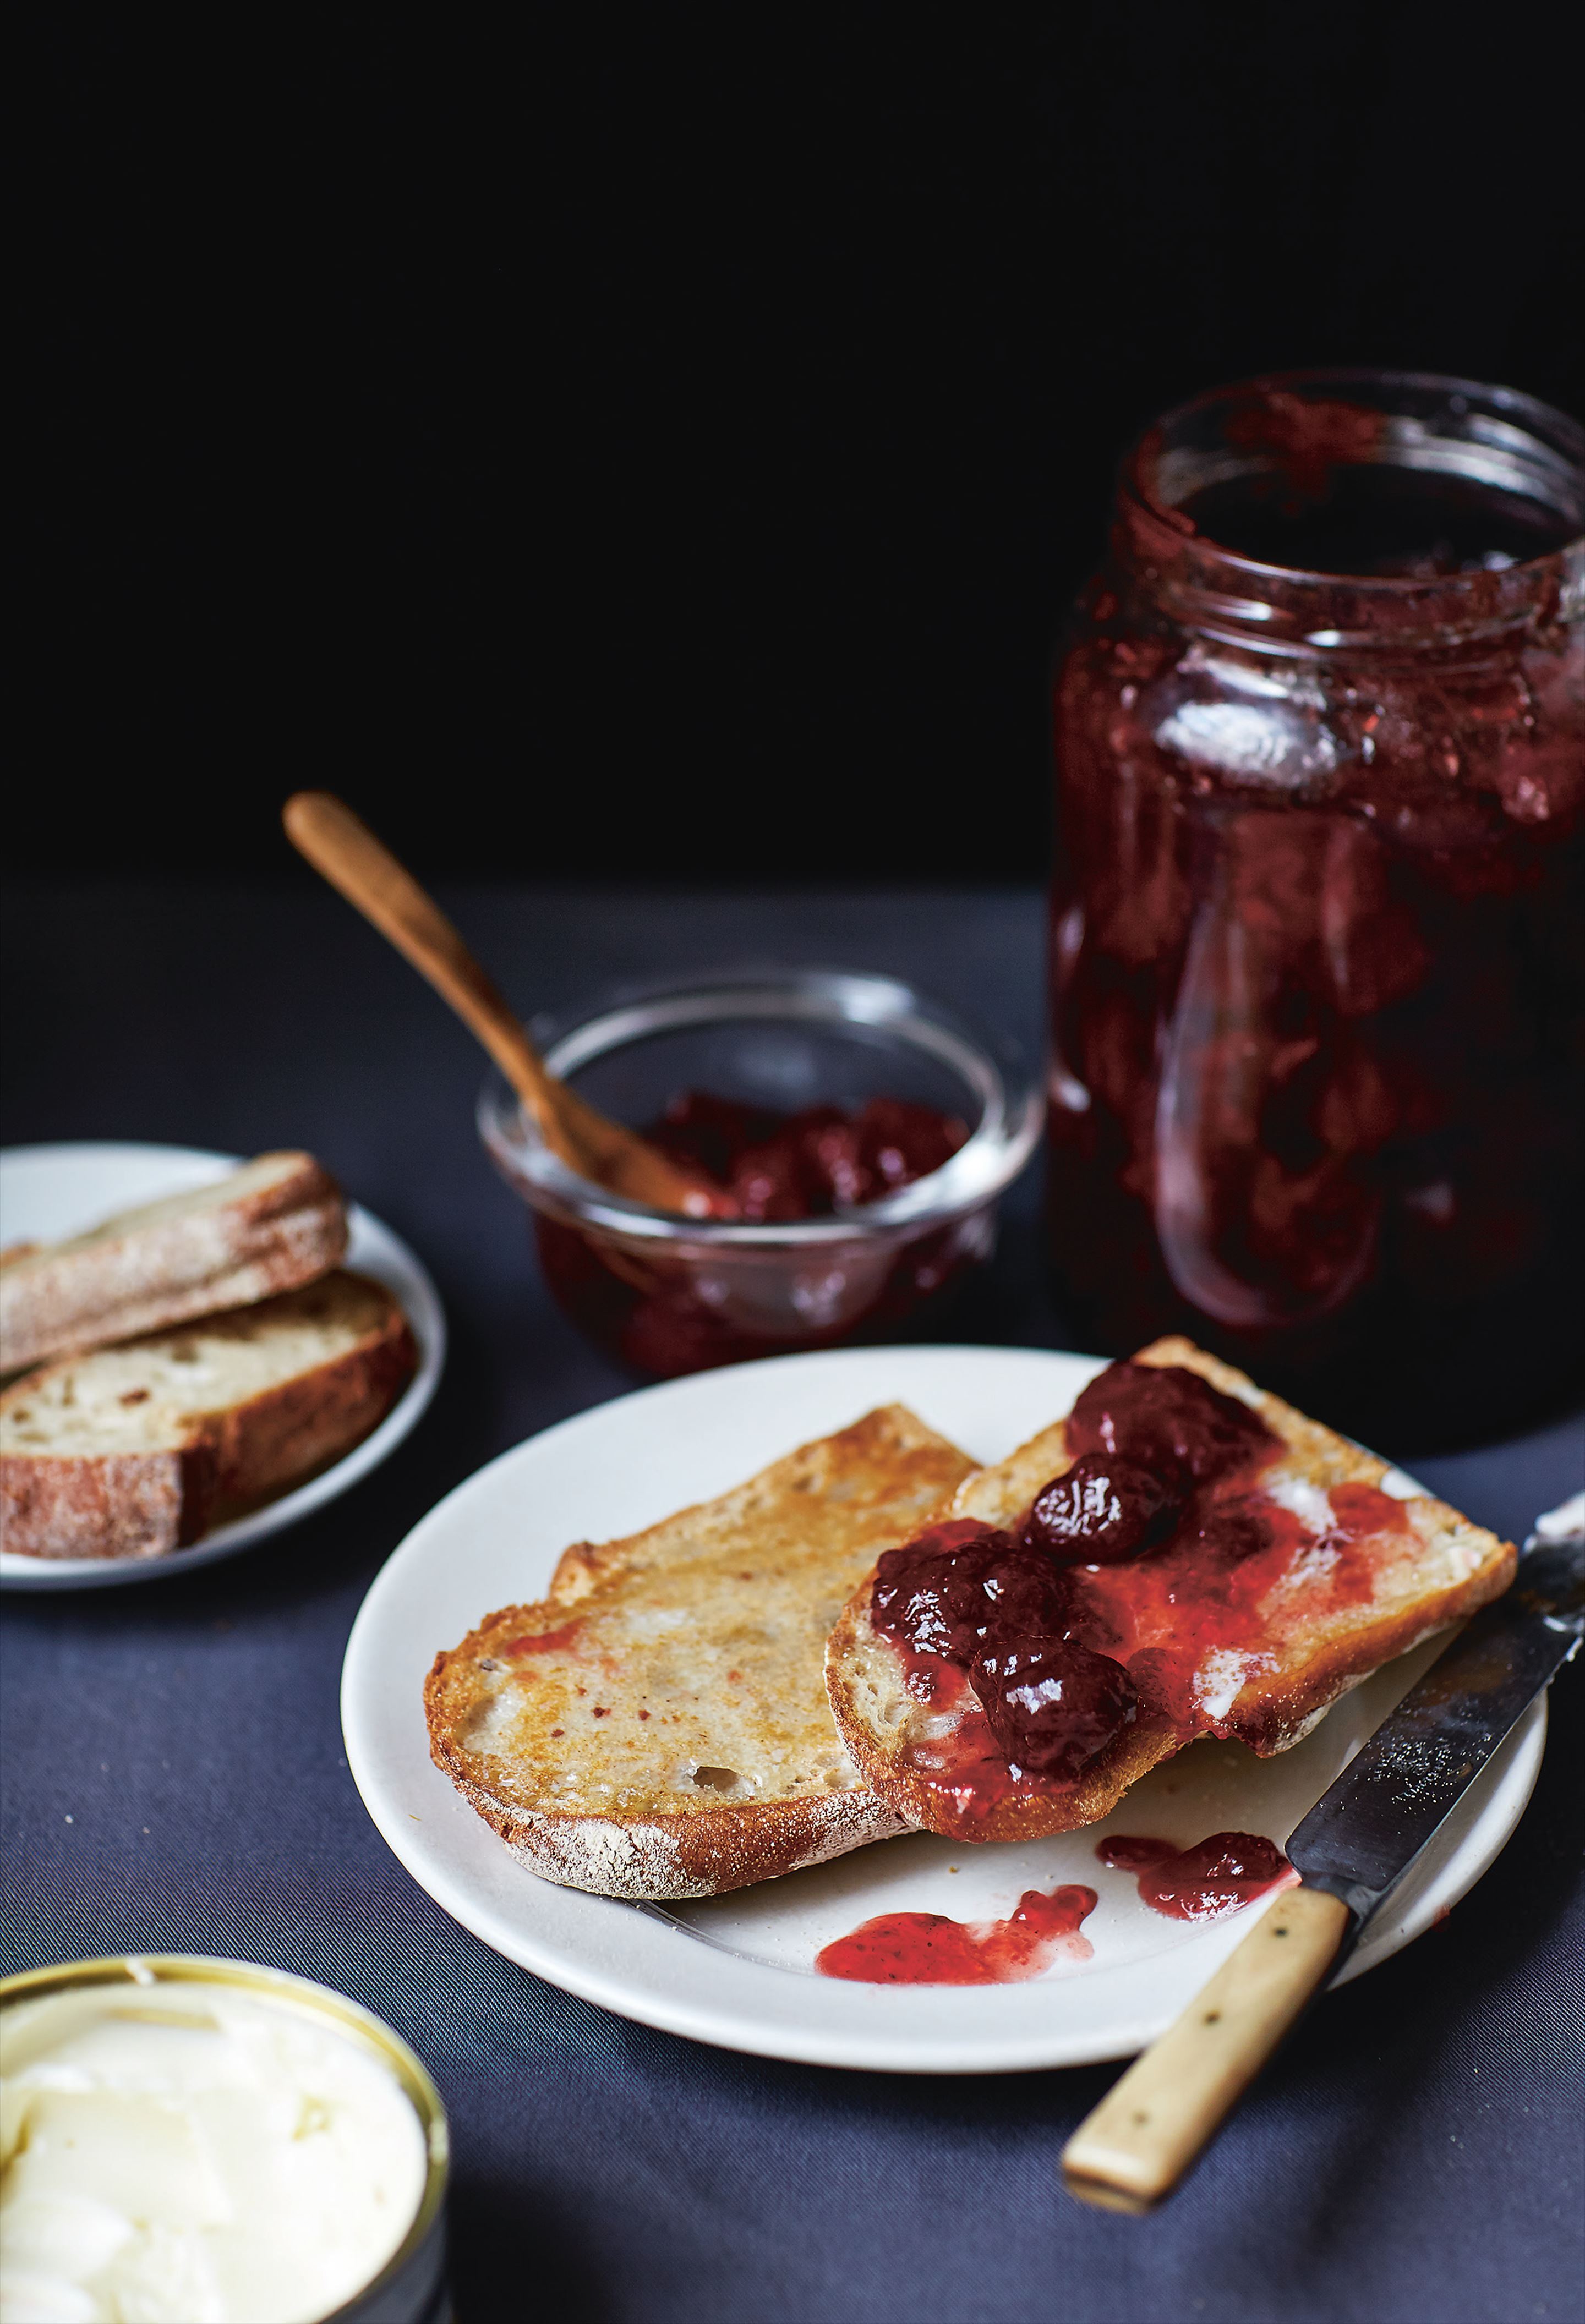 Strawberry and thyme jam